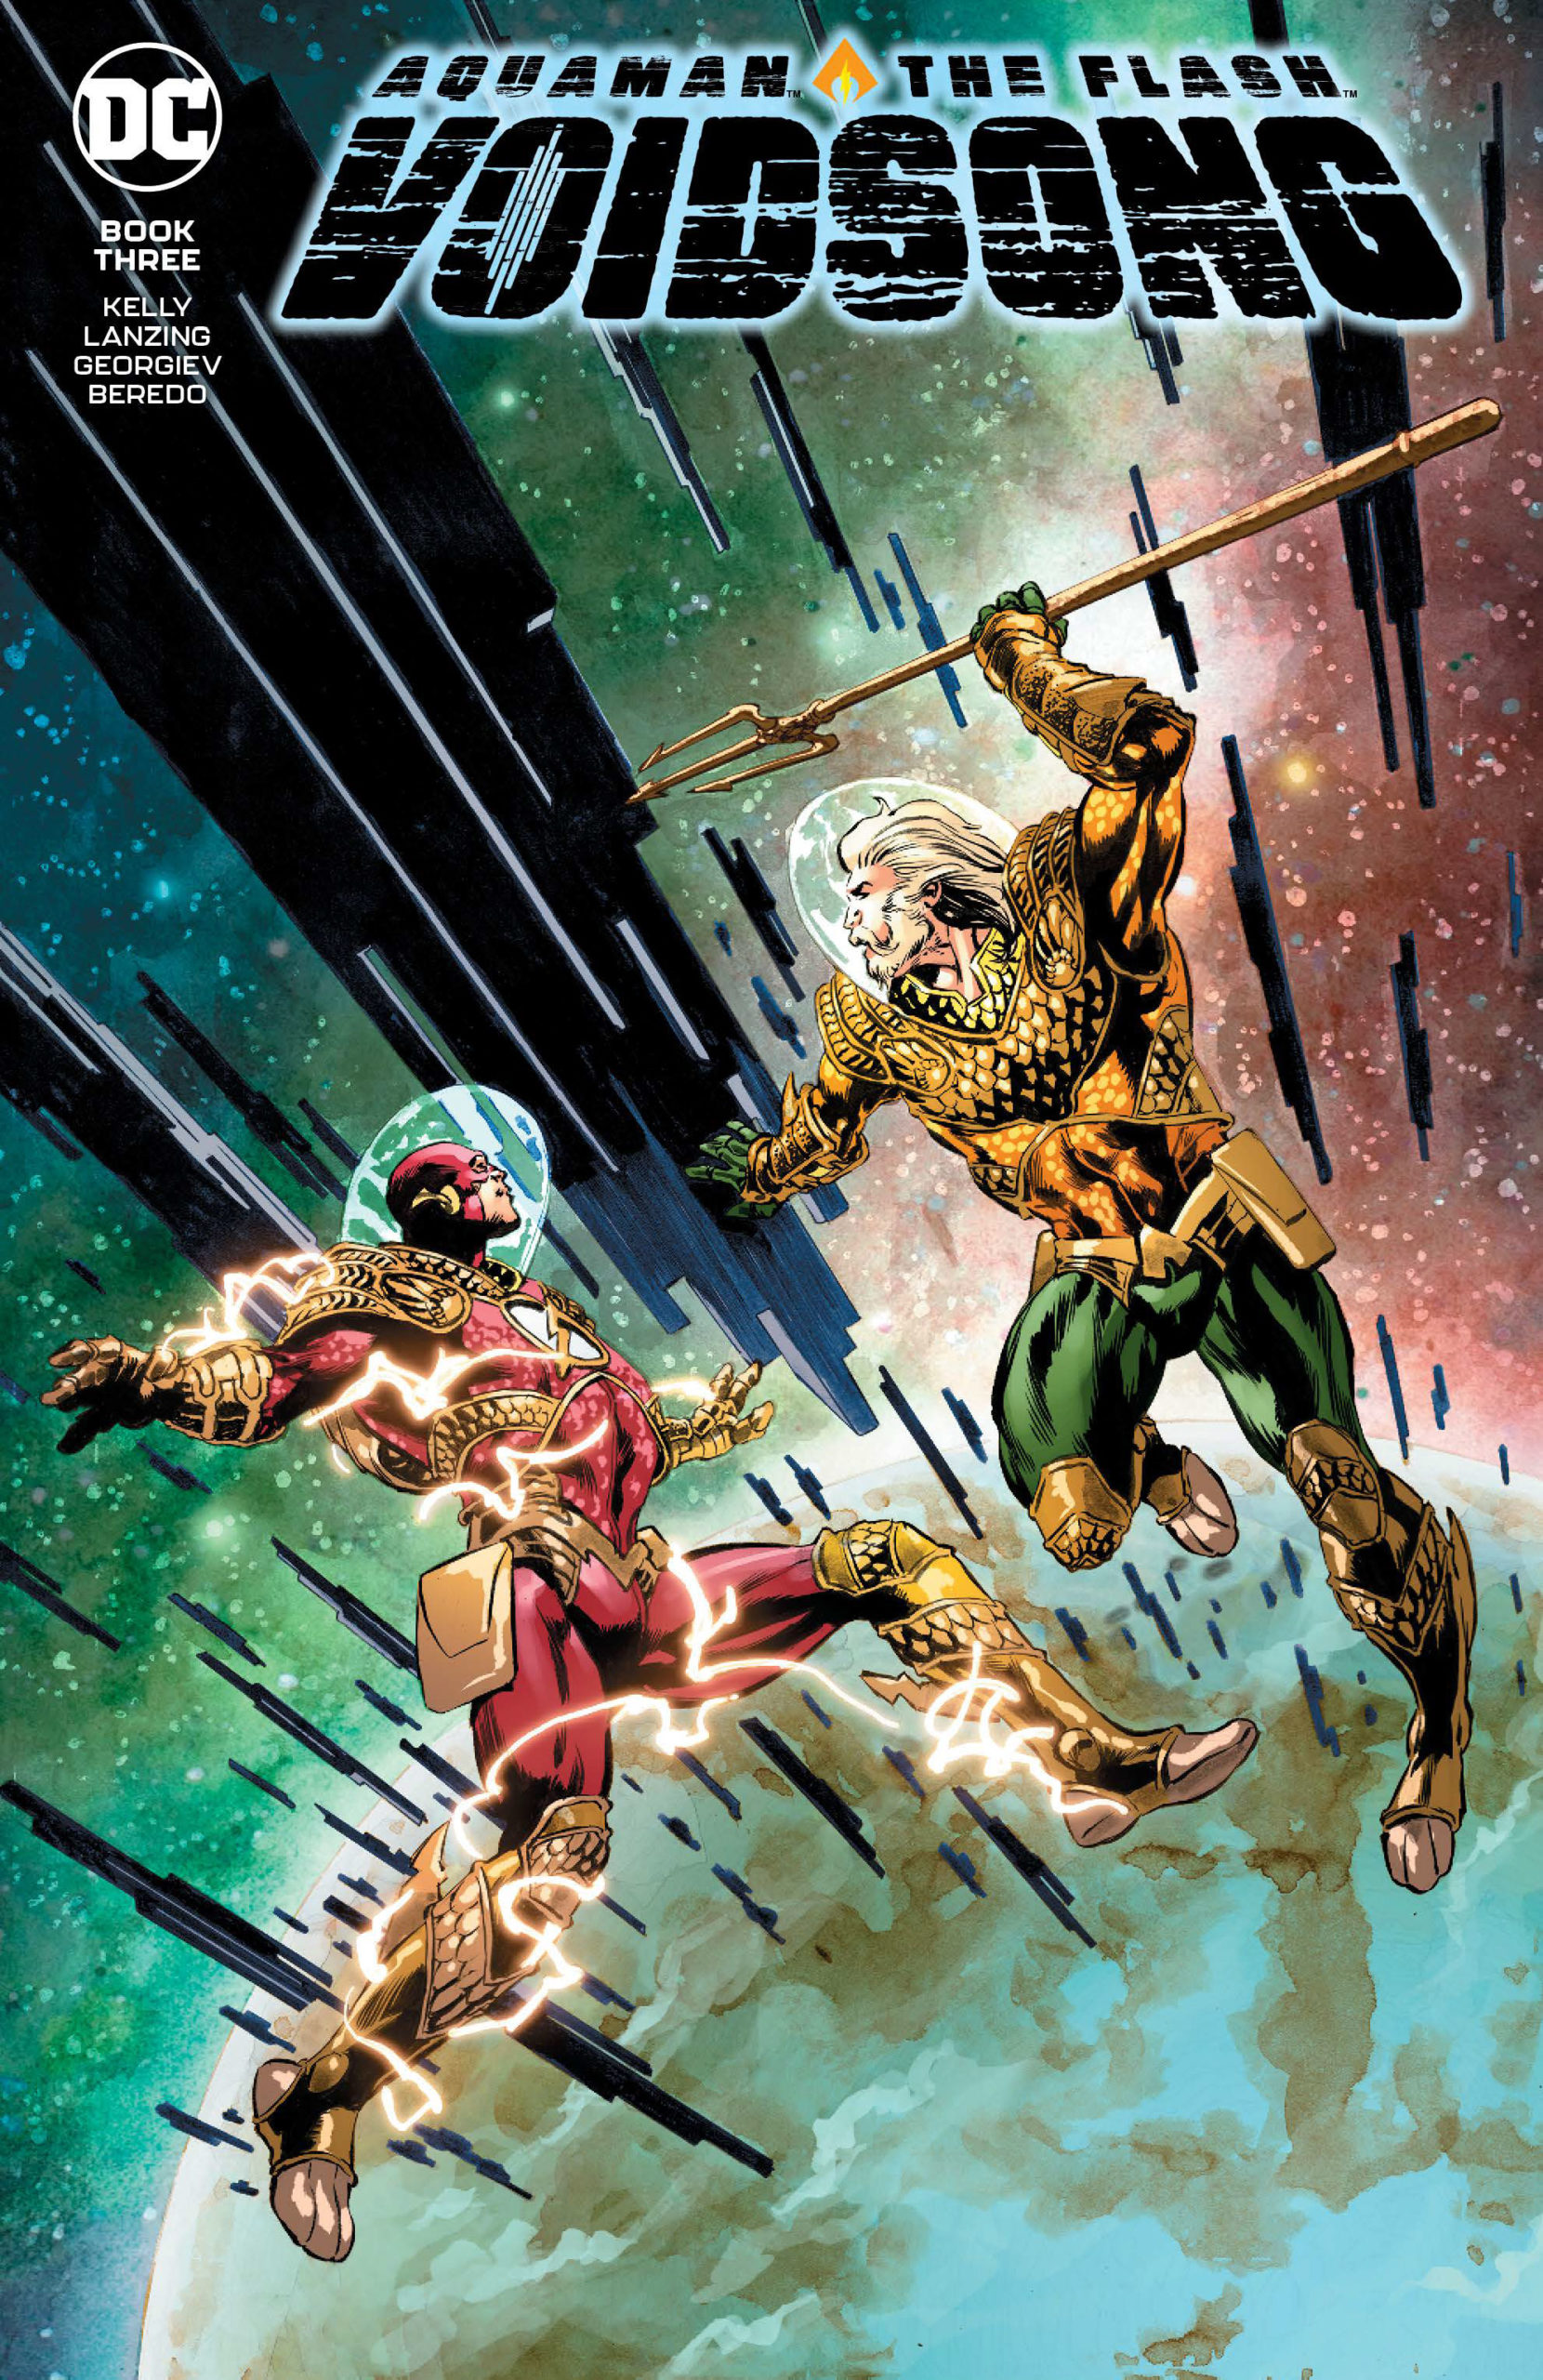 Aquaman and The Flash Voidsong #3